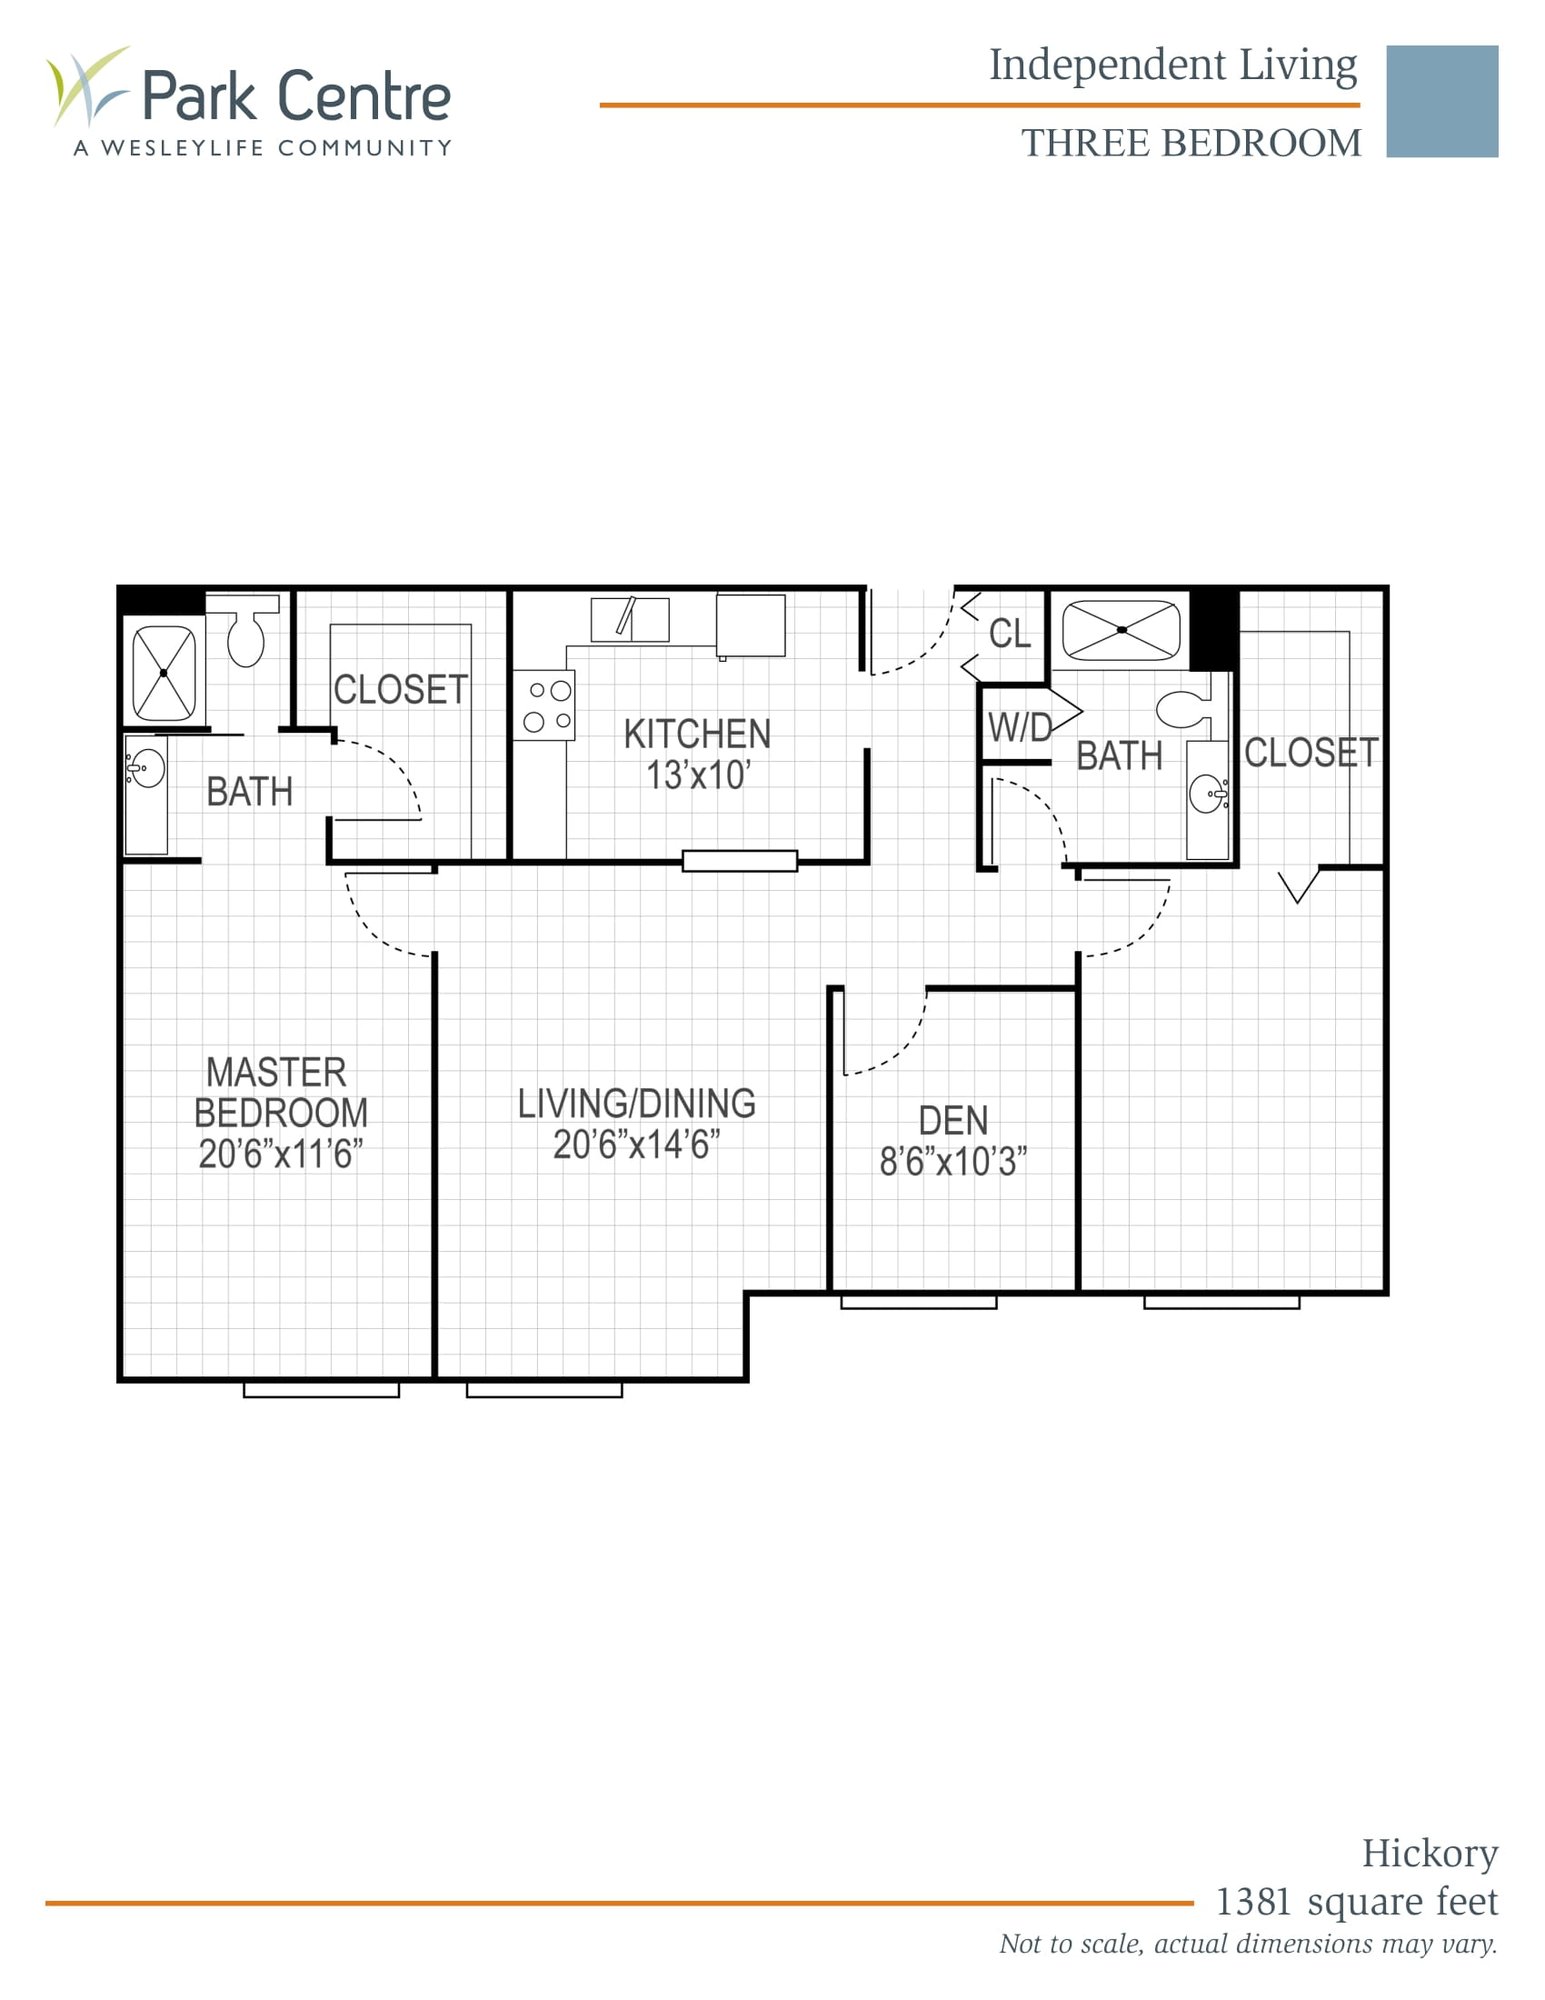 Hickory floor plans